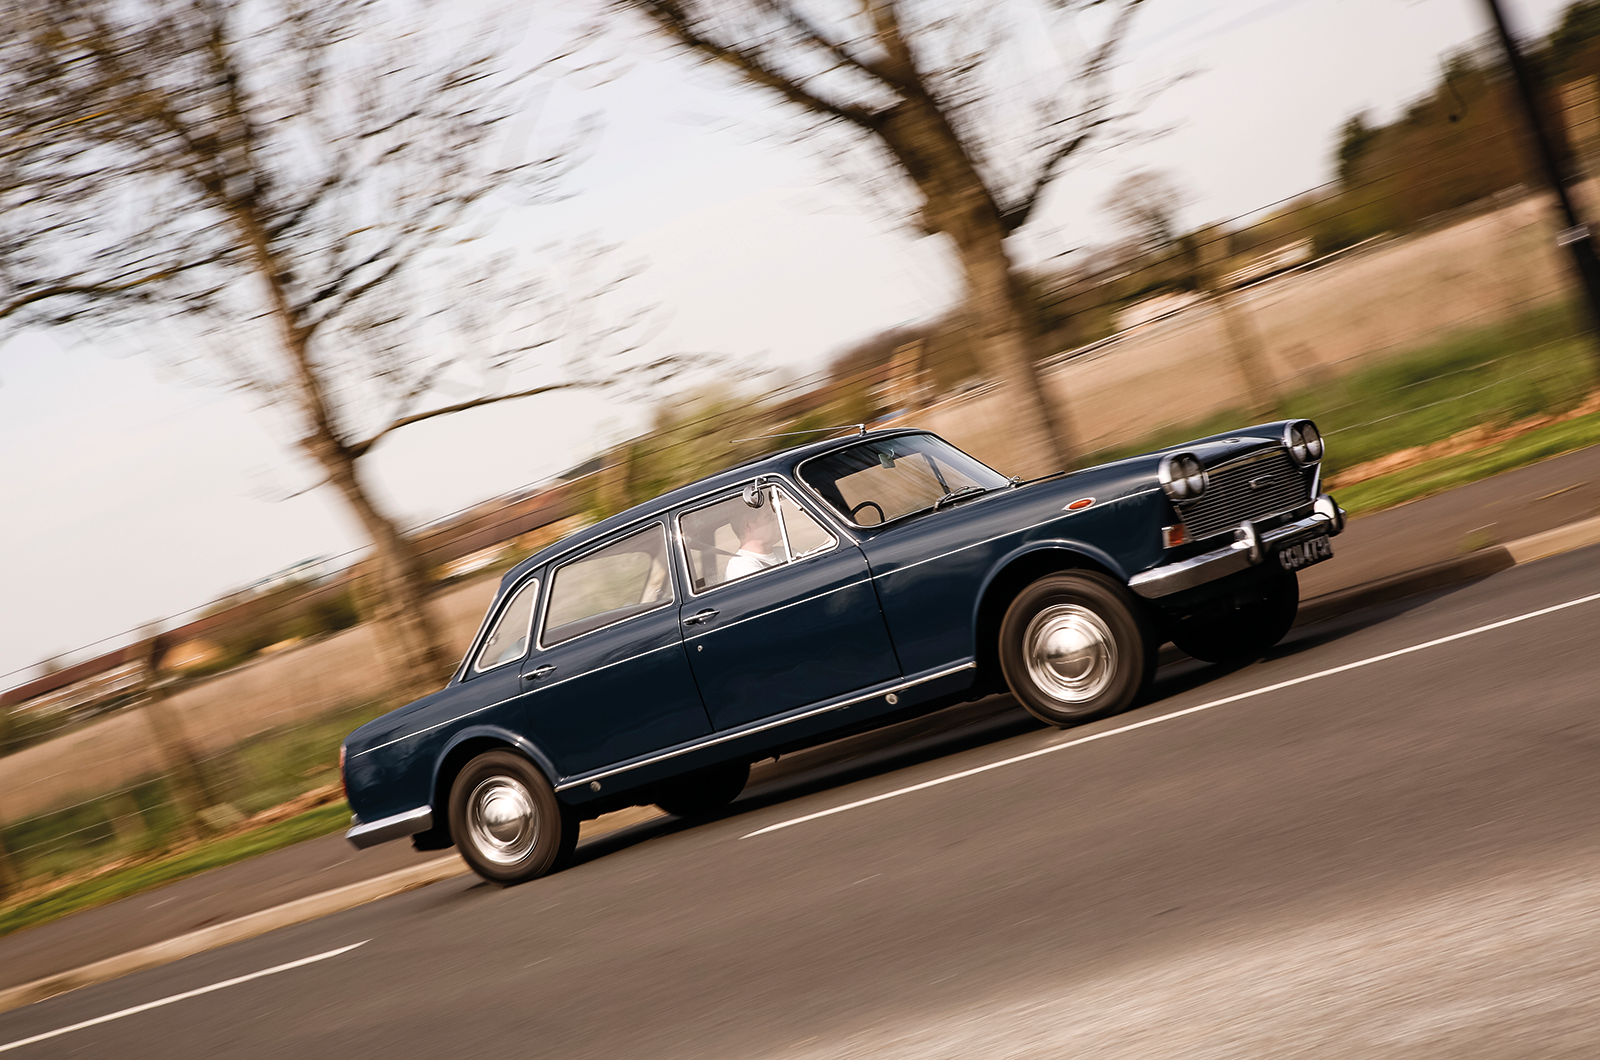 Classic & Sports Car – Battle for the boardroom: Austin 3 Litre vs Ford Executive vs Vauxhall Viscount